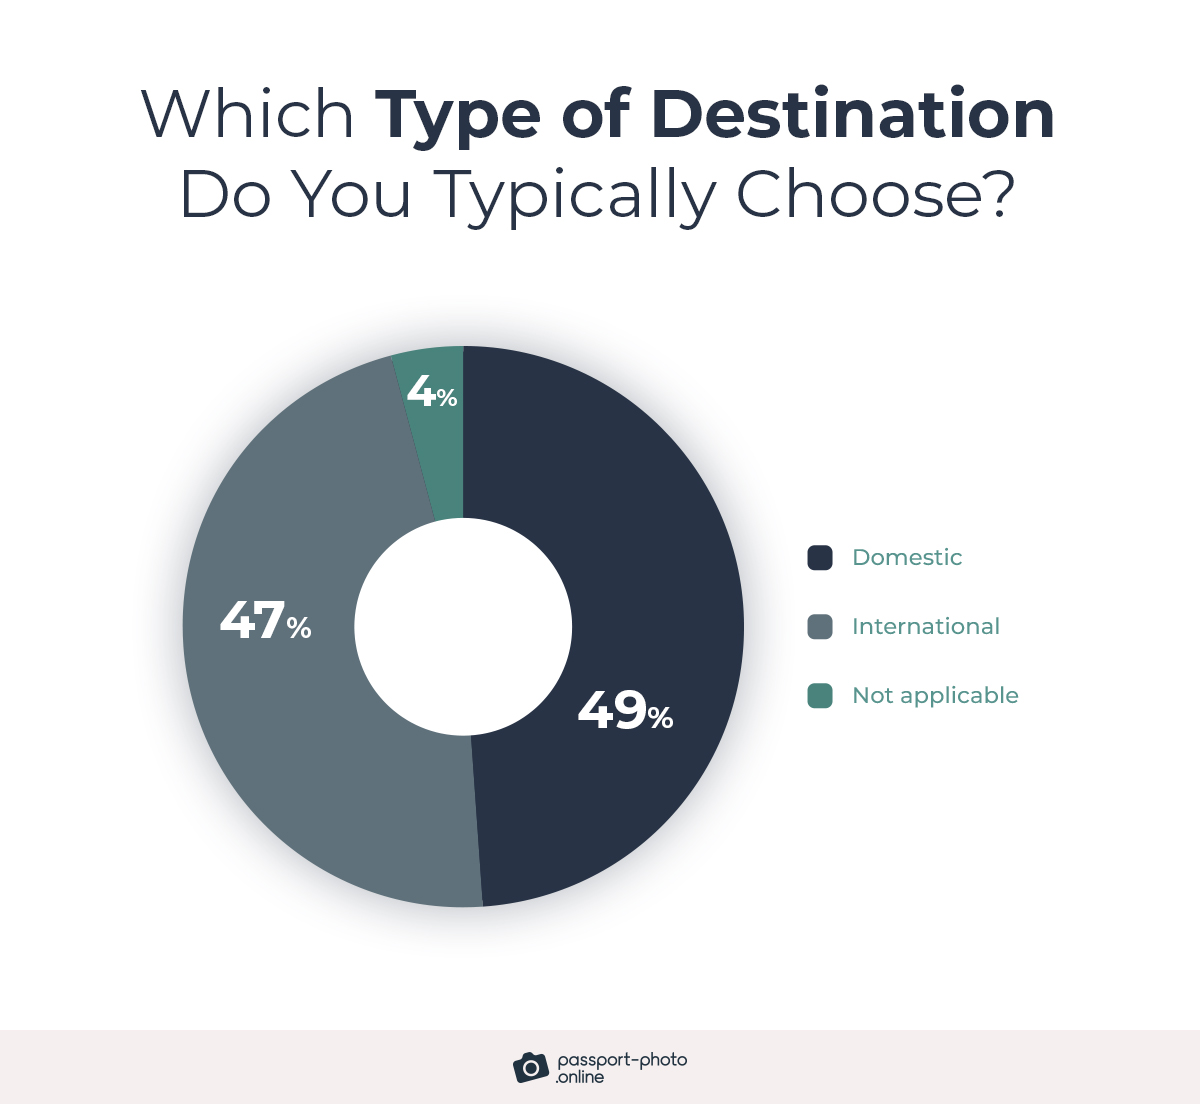 while domestic destinations are the preferred option (49%), 47% of respondents usually go abroad